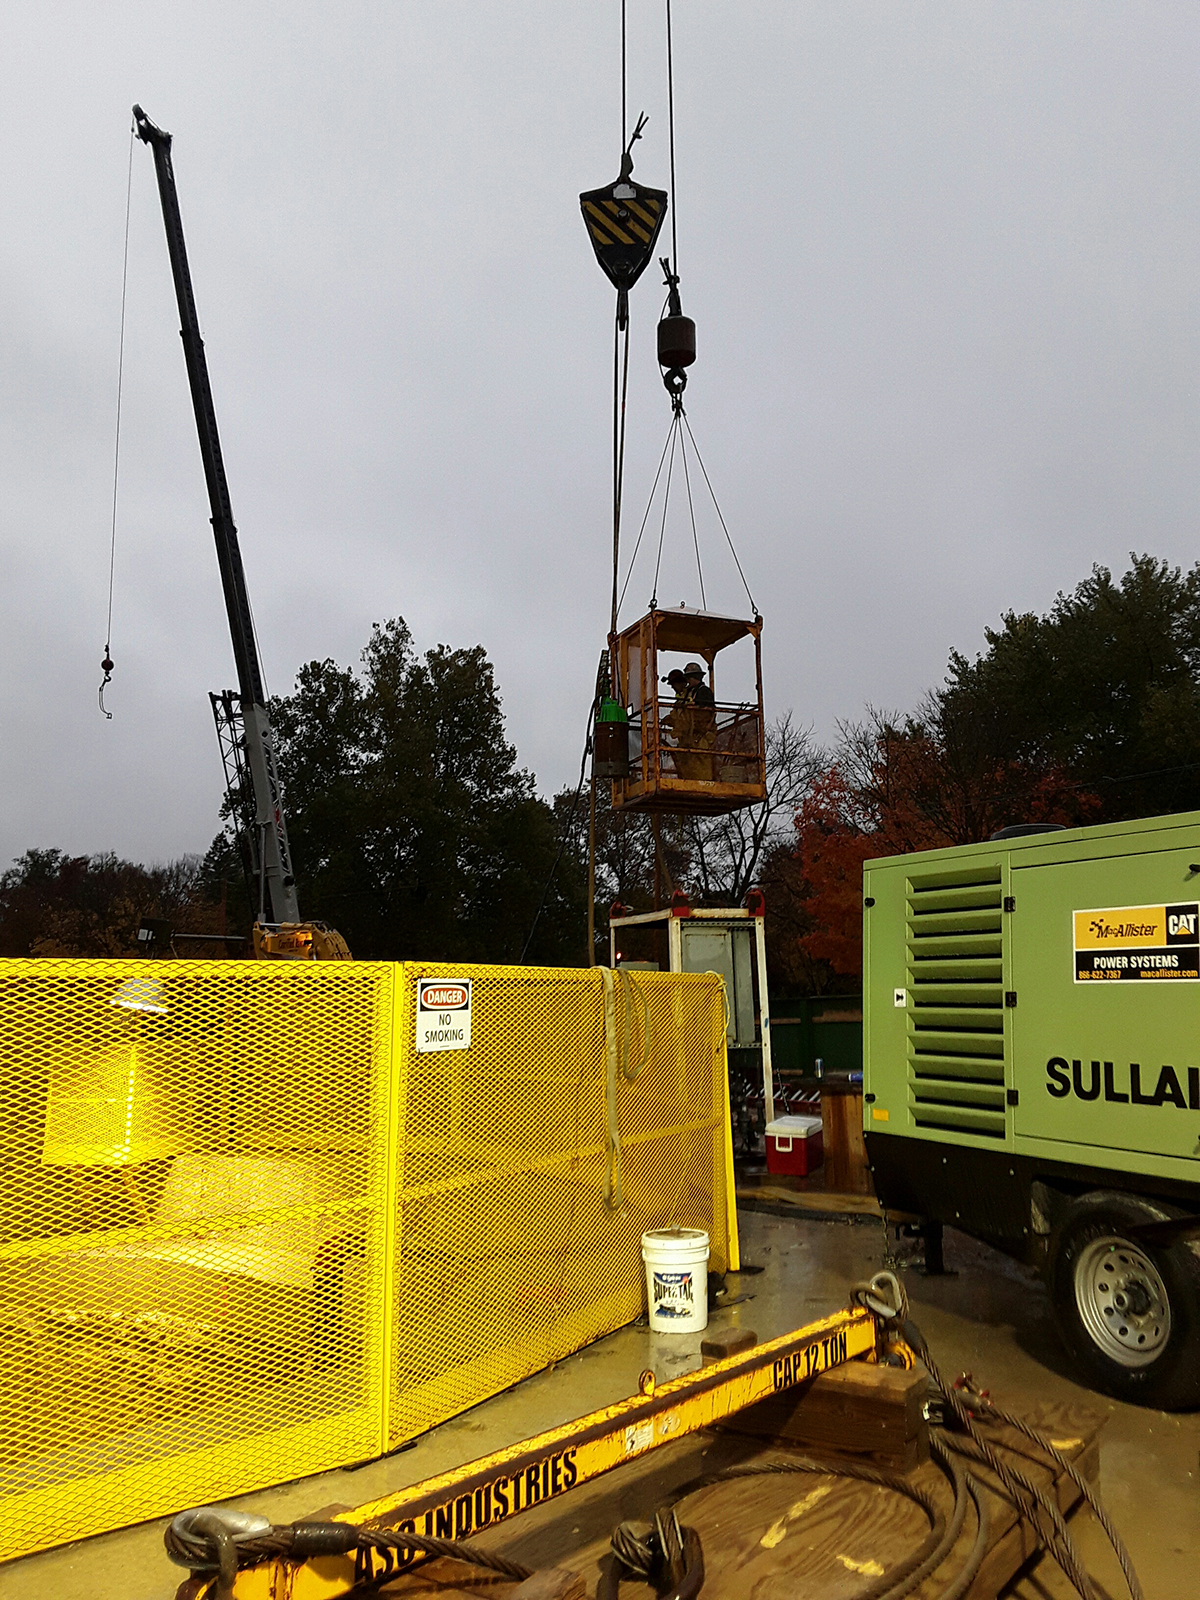  2019 10 31 RS Stiffler and Tuwah being lowered into the shaft to install a larger pump at 833